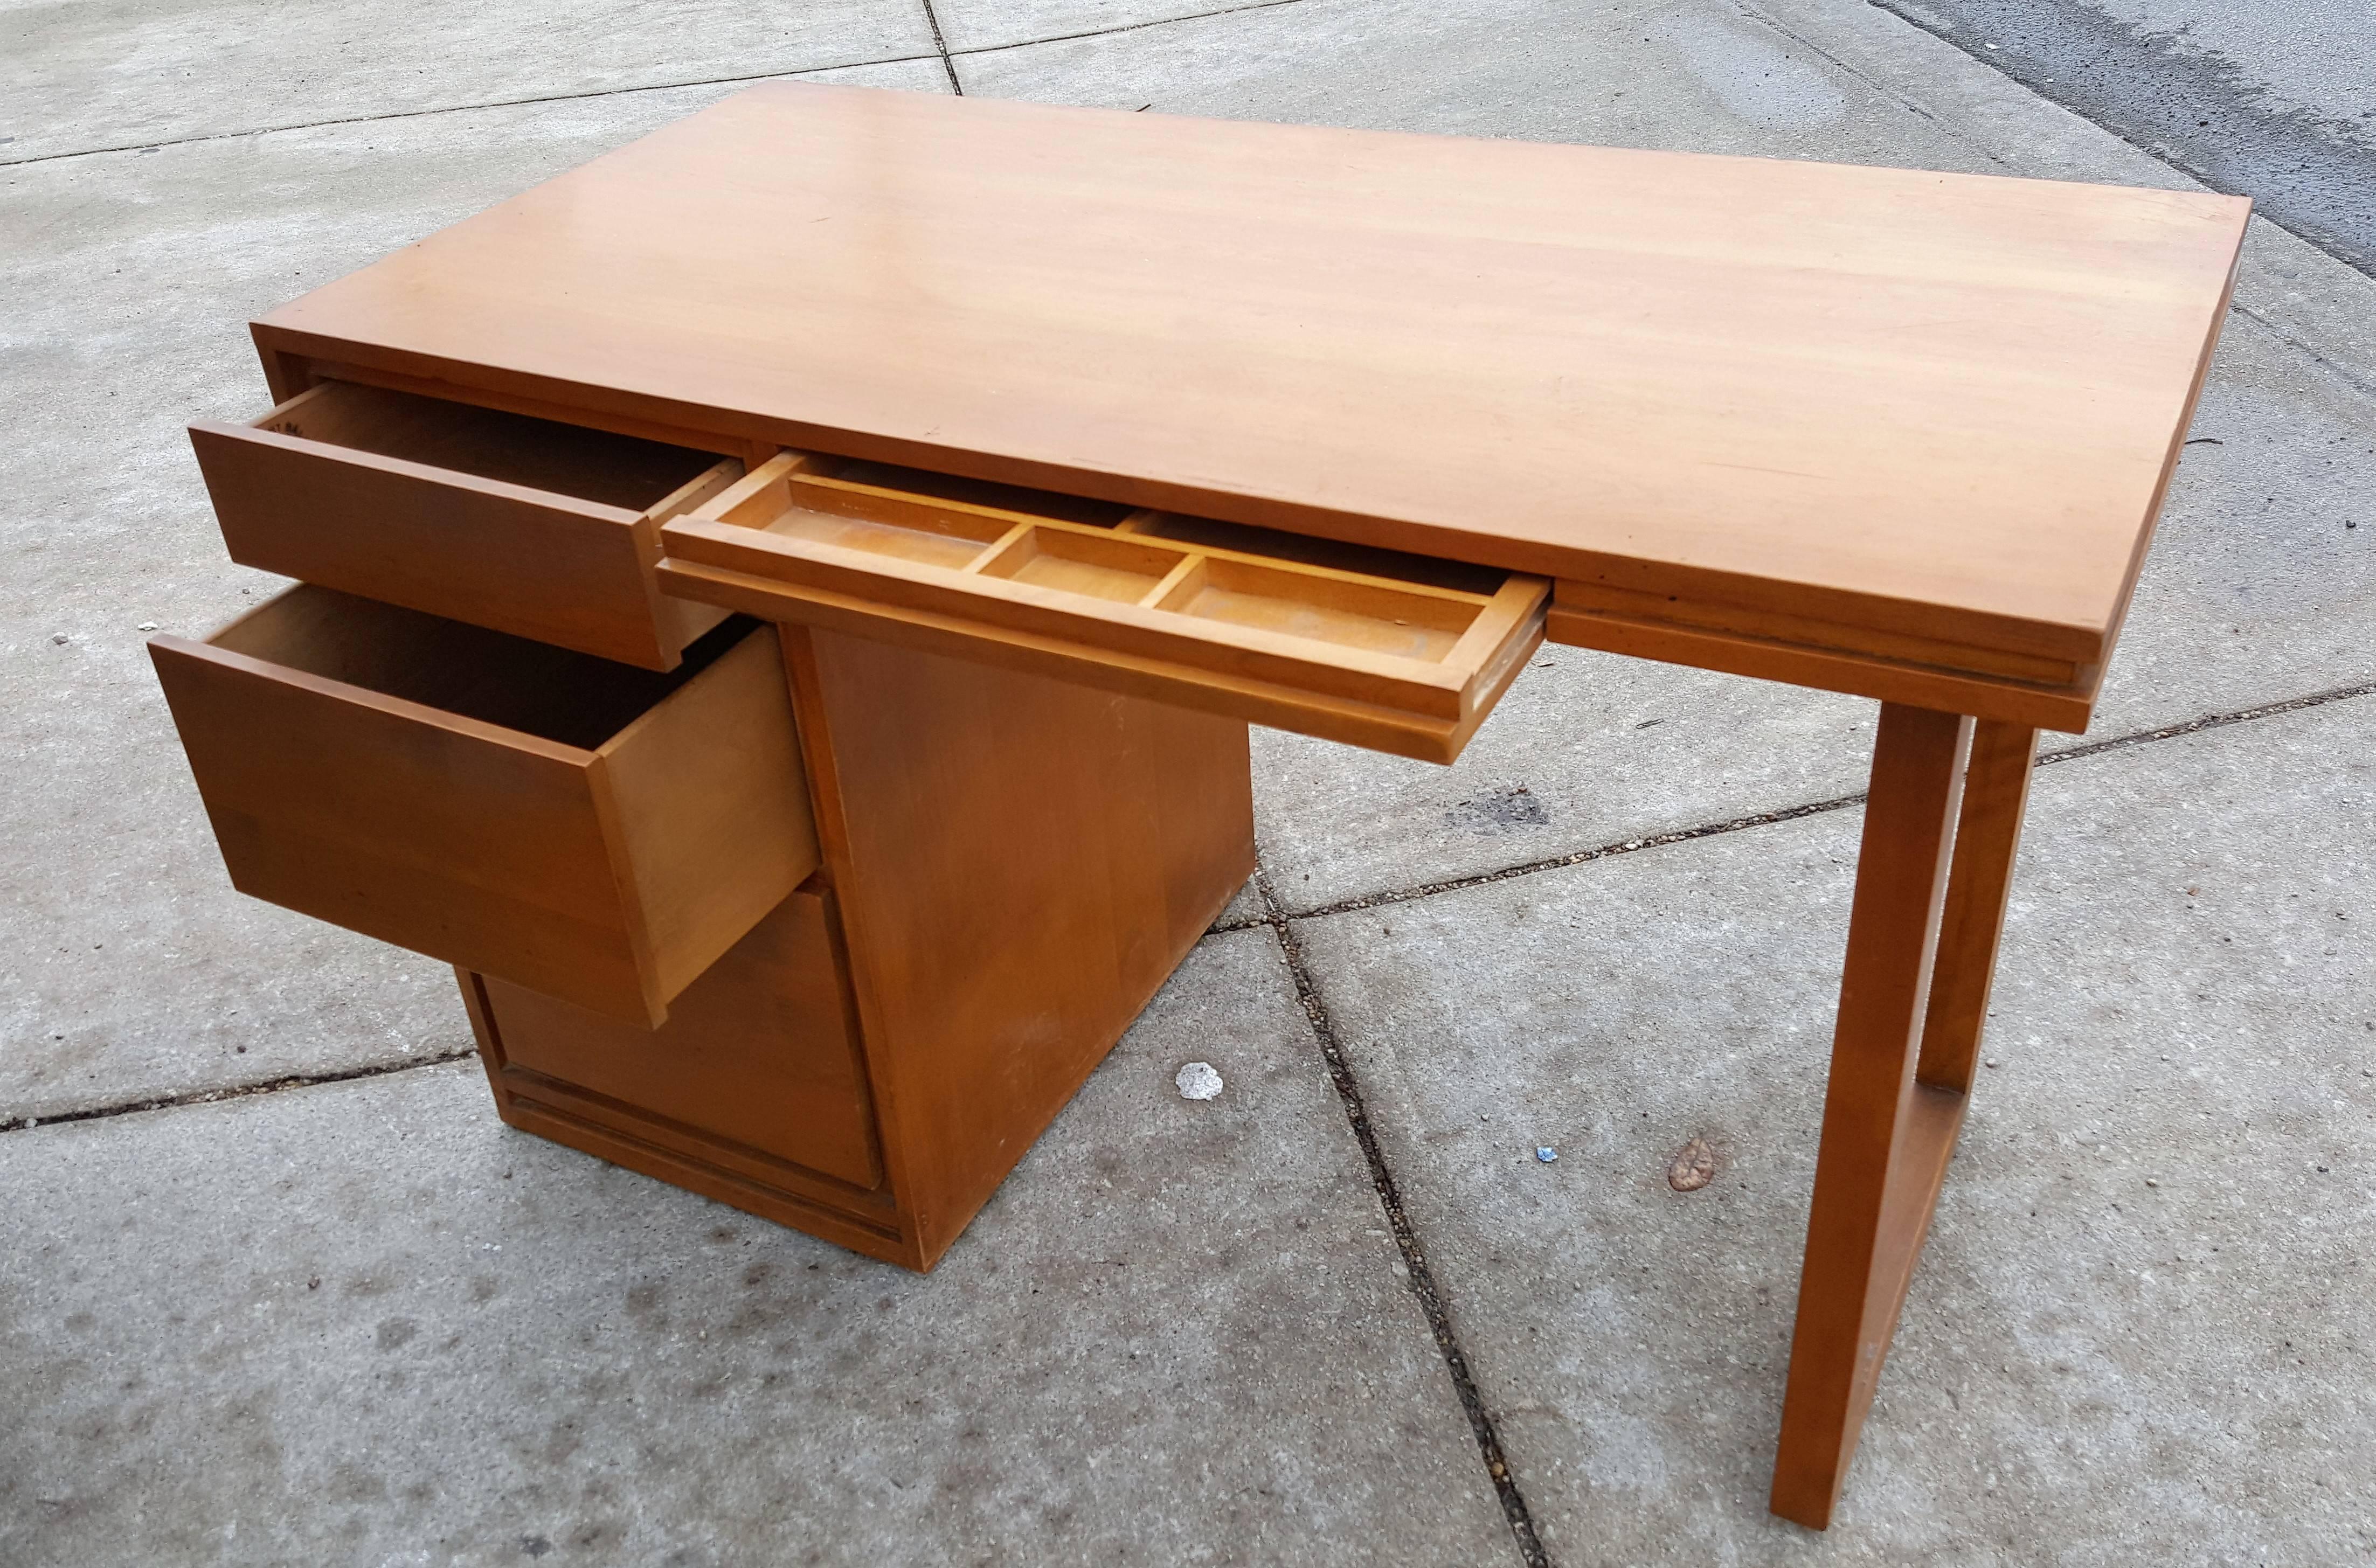 Russel Wright for Conant Ball company Mid-Century Modern solid birch desk from the 1950s Modernmates Line. The desk has a solid left side with three gradient sized drawers, convenient center drawer with organized compartments and open support to the